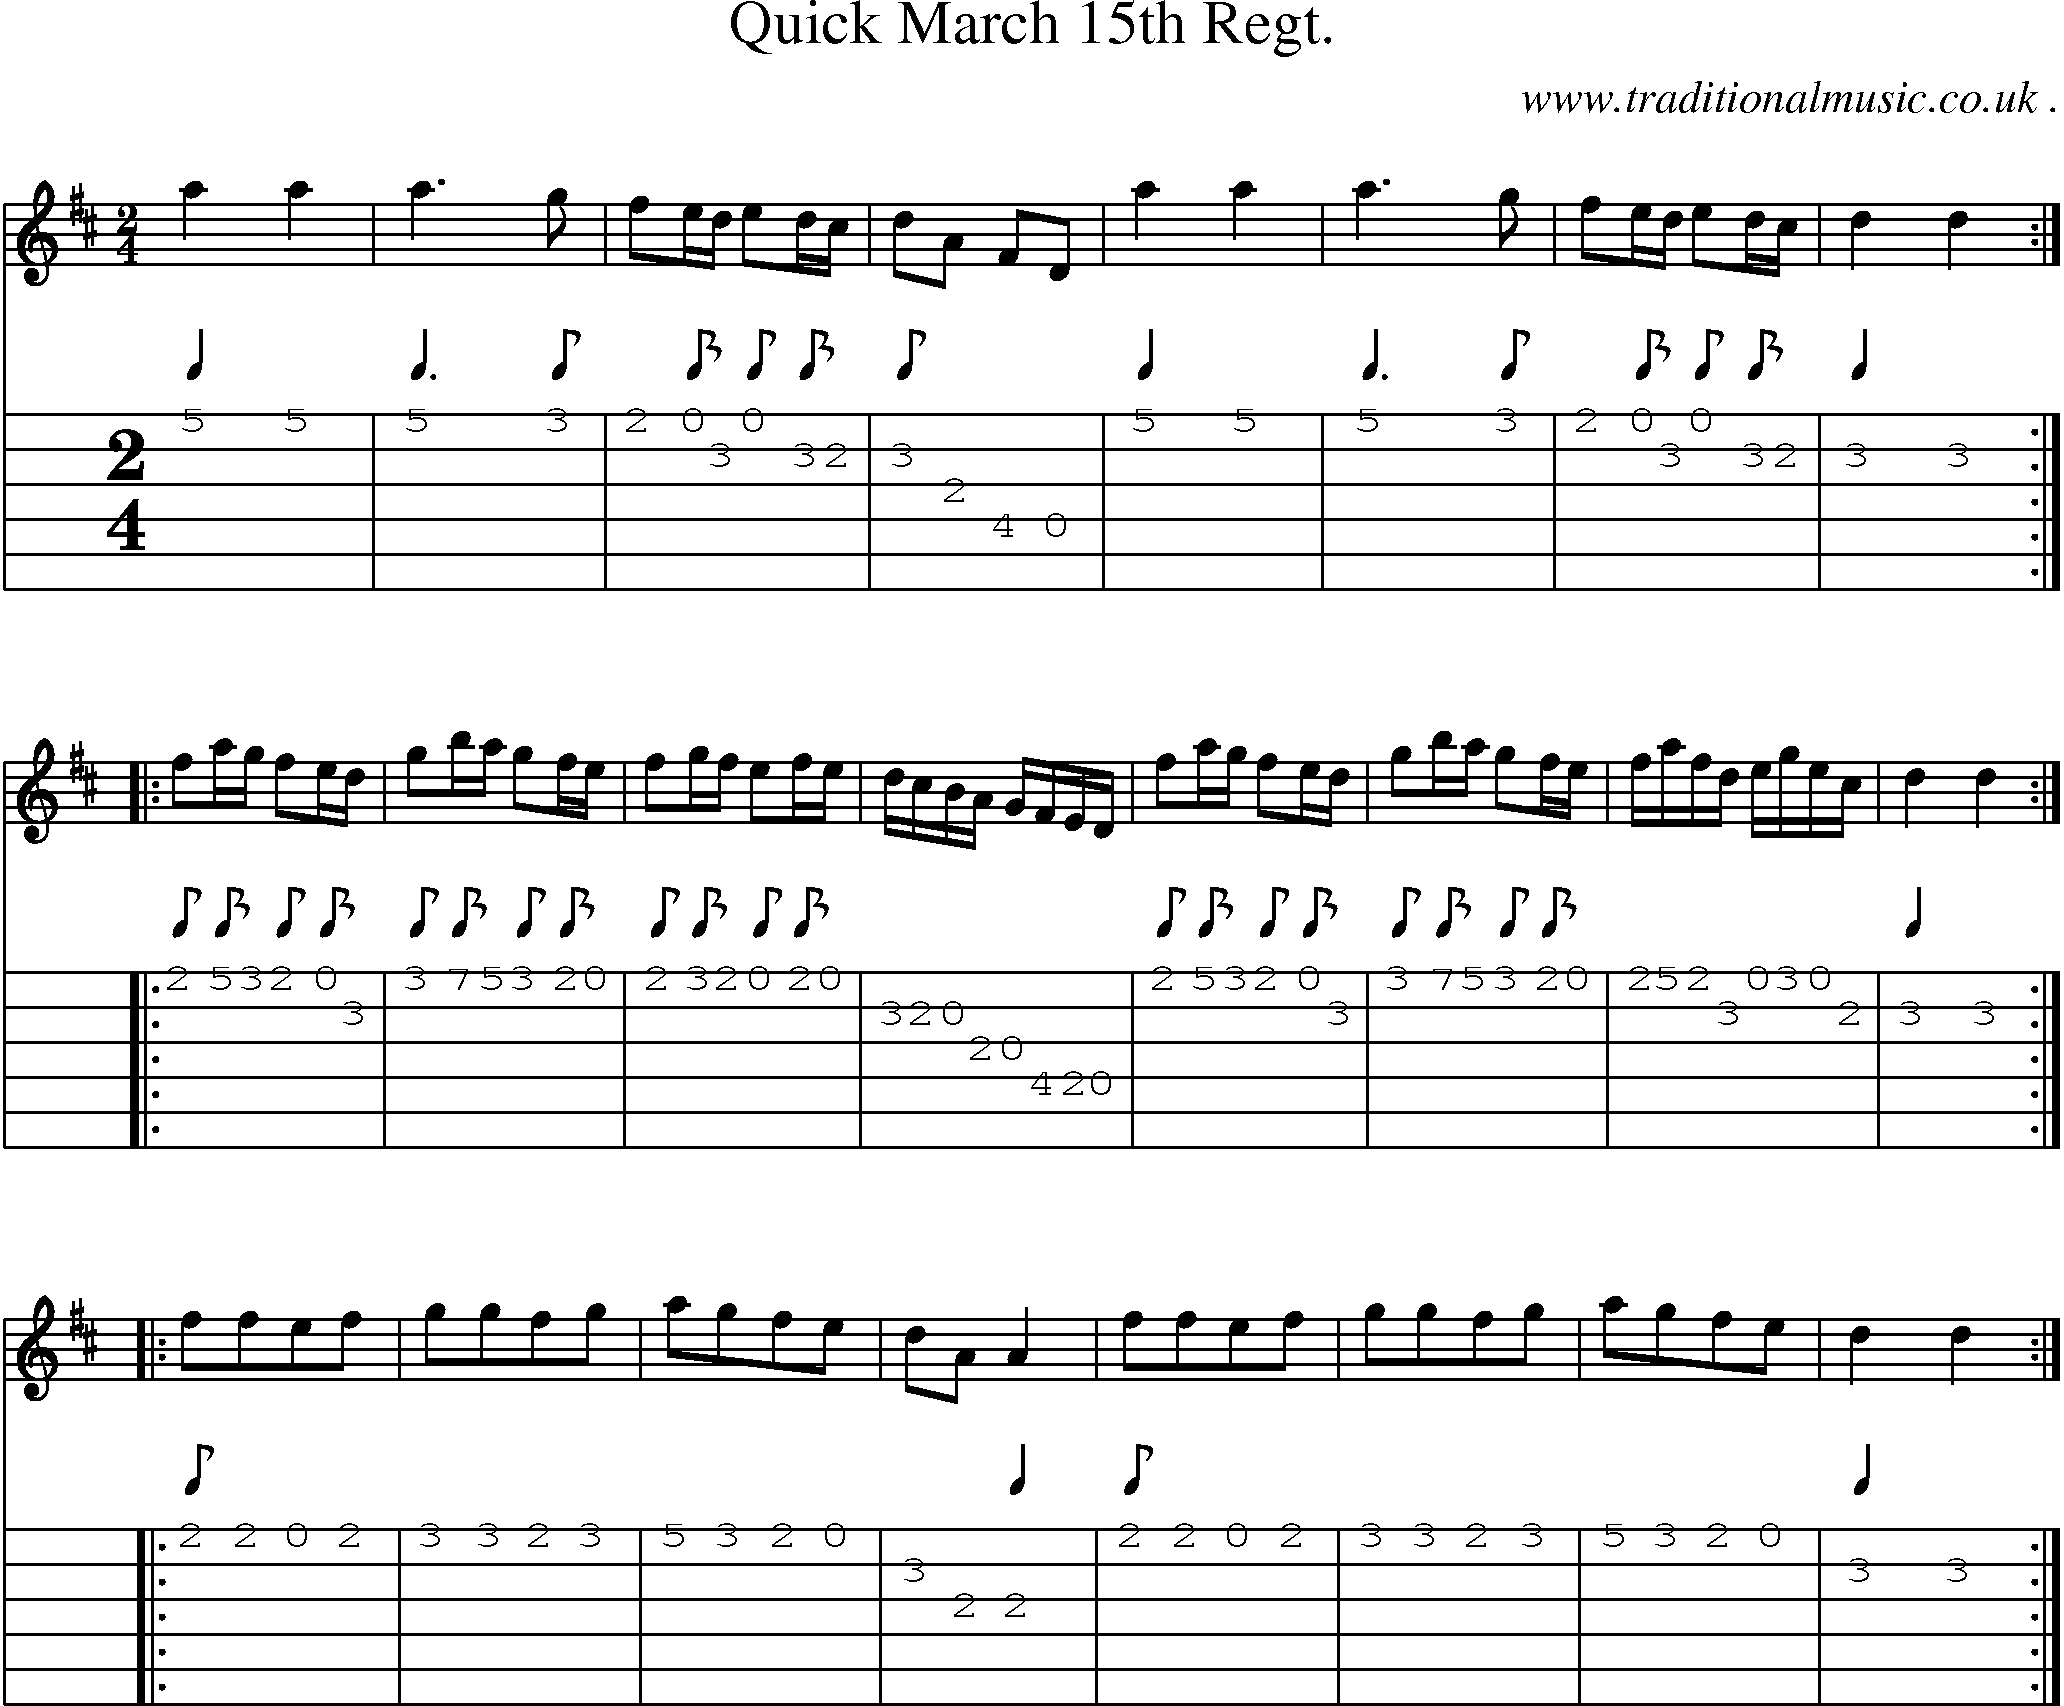 Sheet-music  score, Chords and Guitar Tabs for Quick March 15th Regt